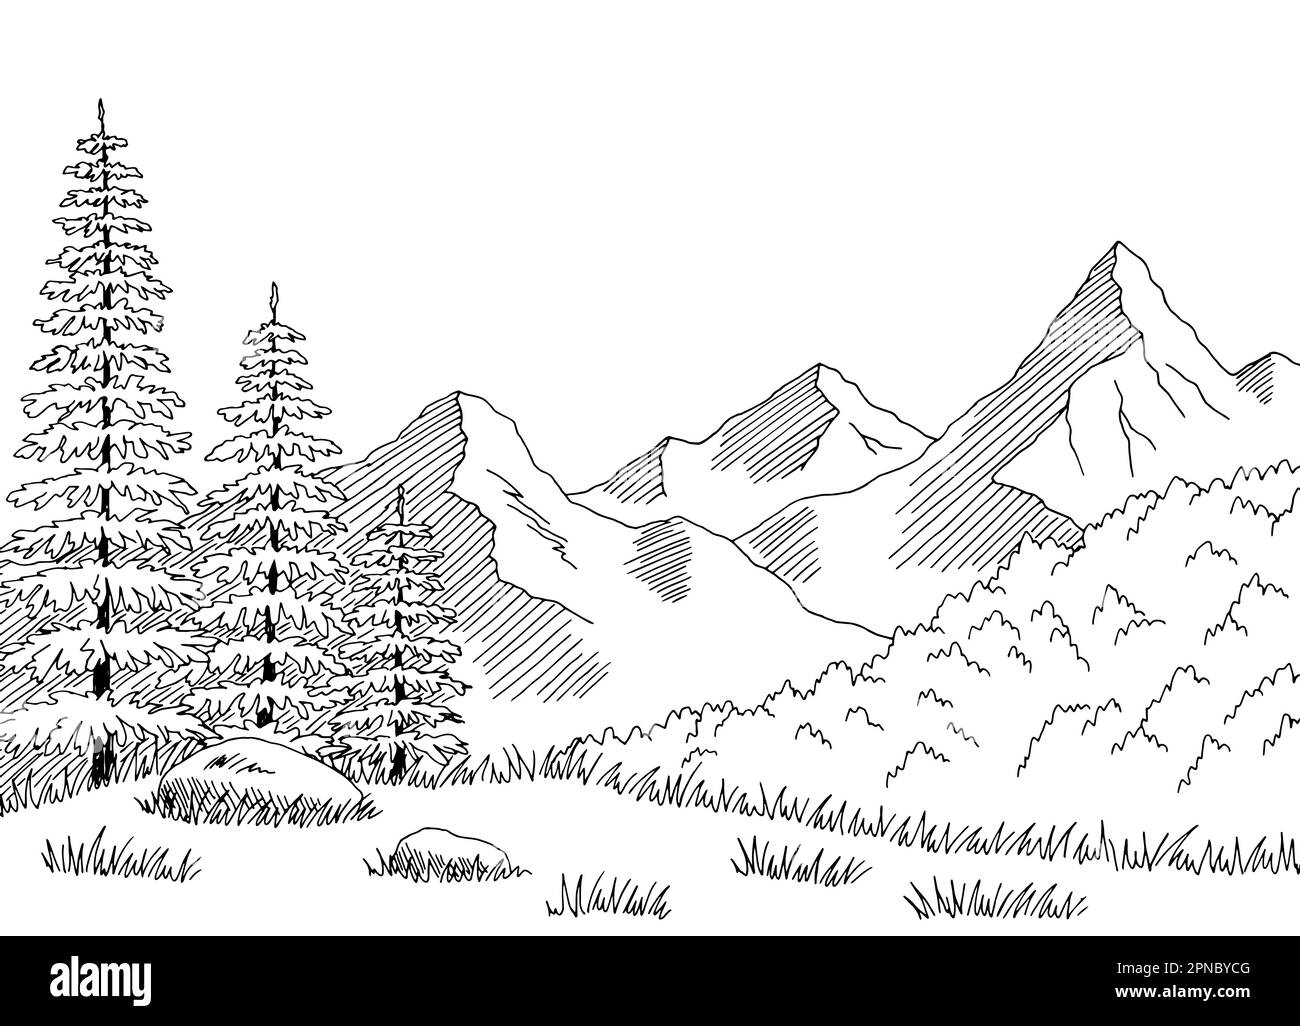 Taiga forest mountains hill graphic black white landscape sketch